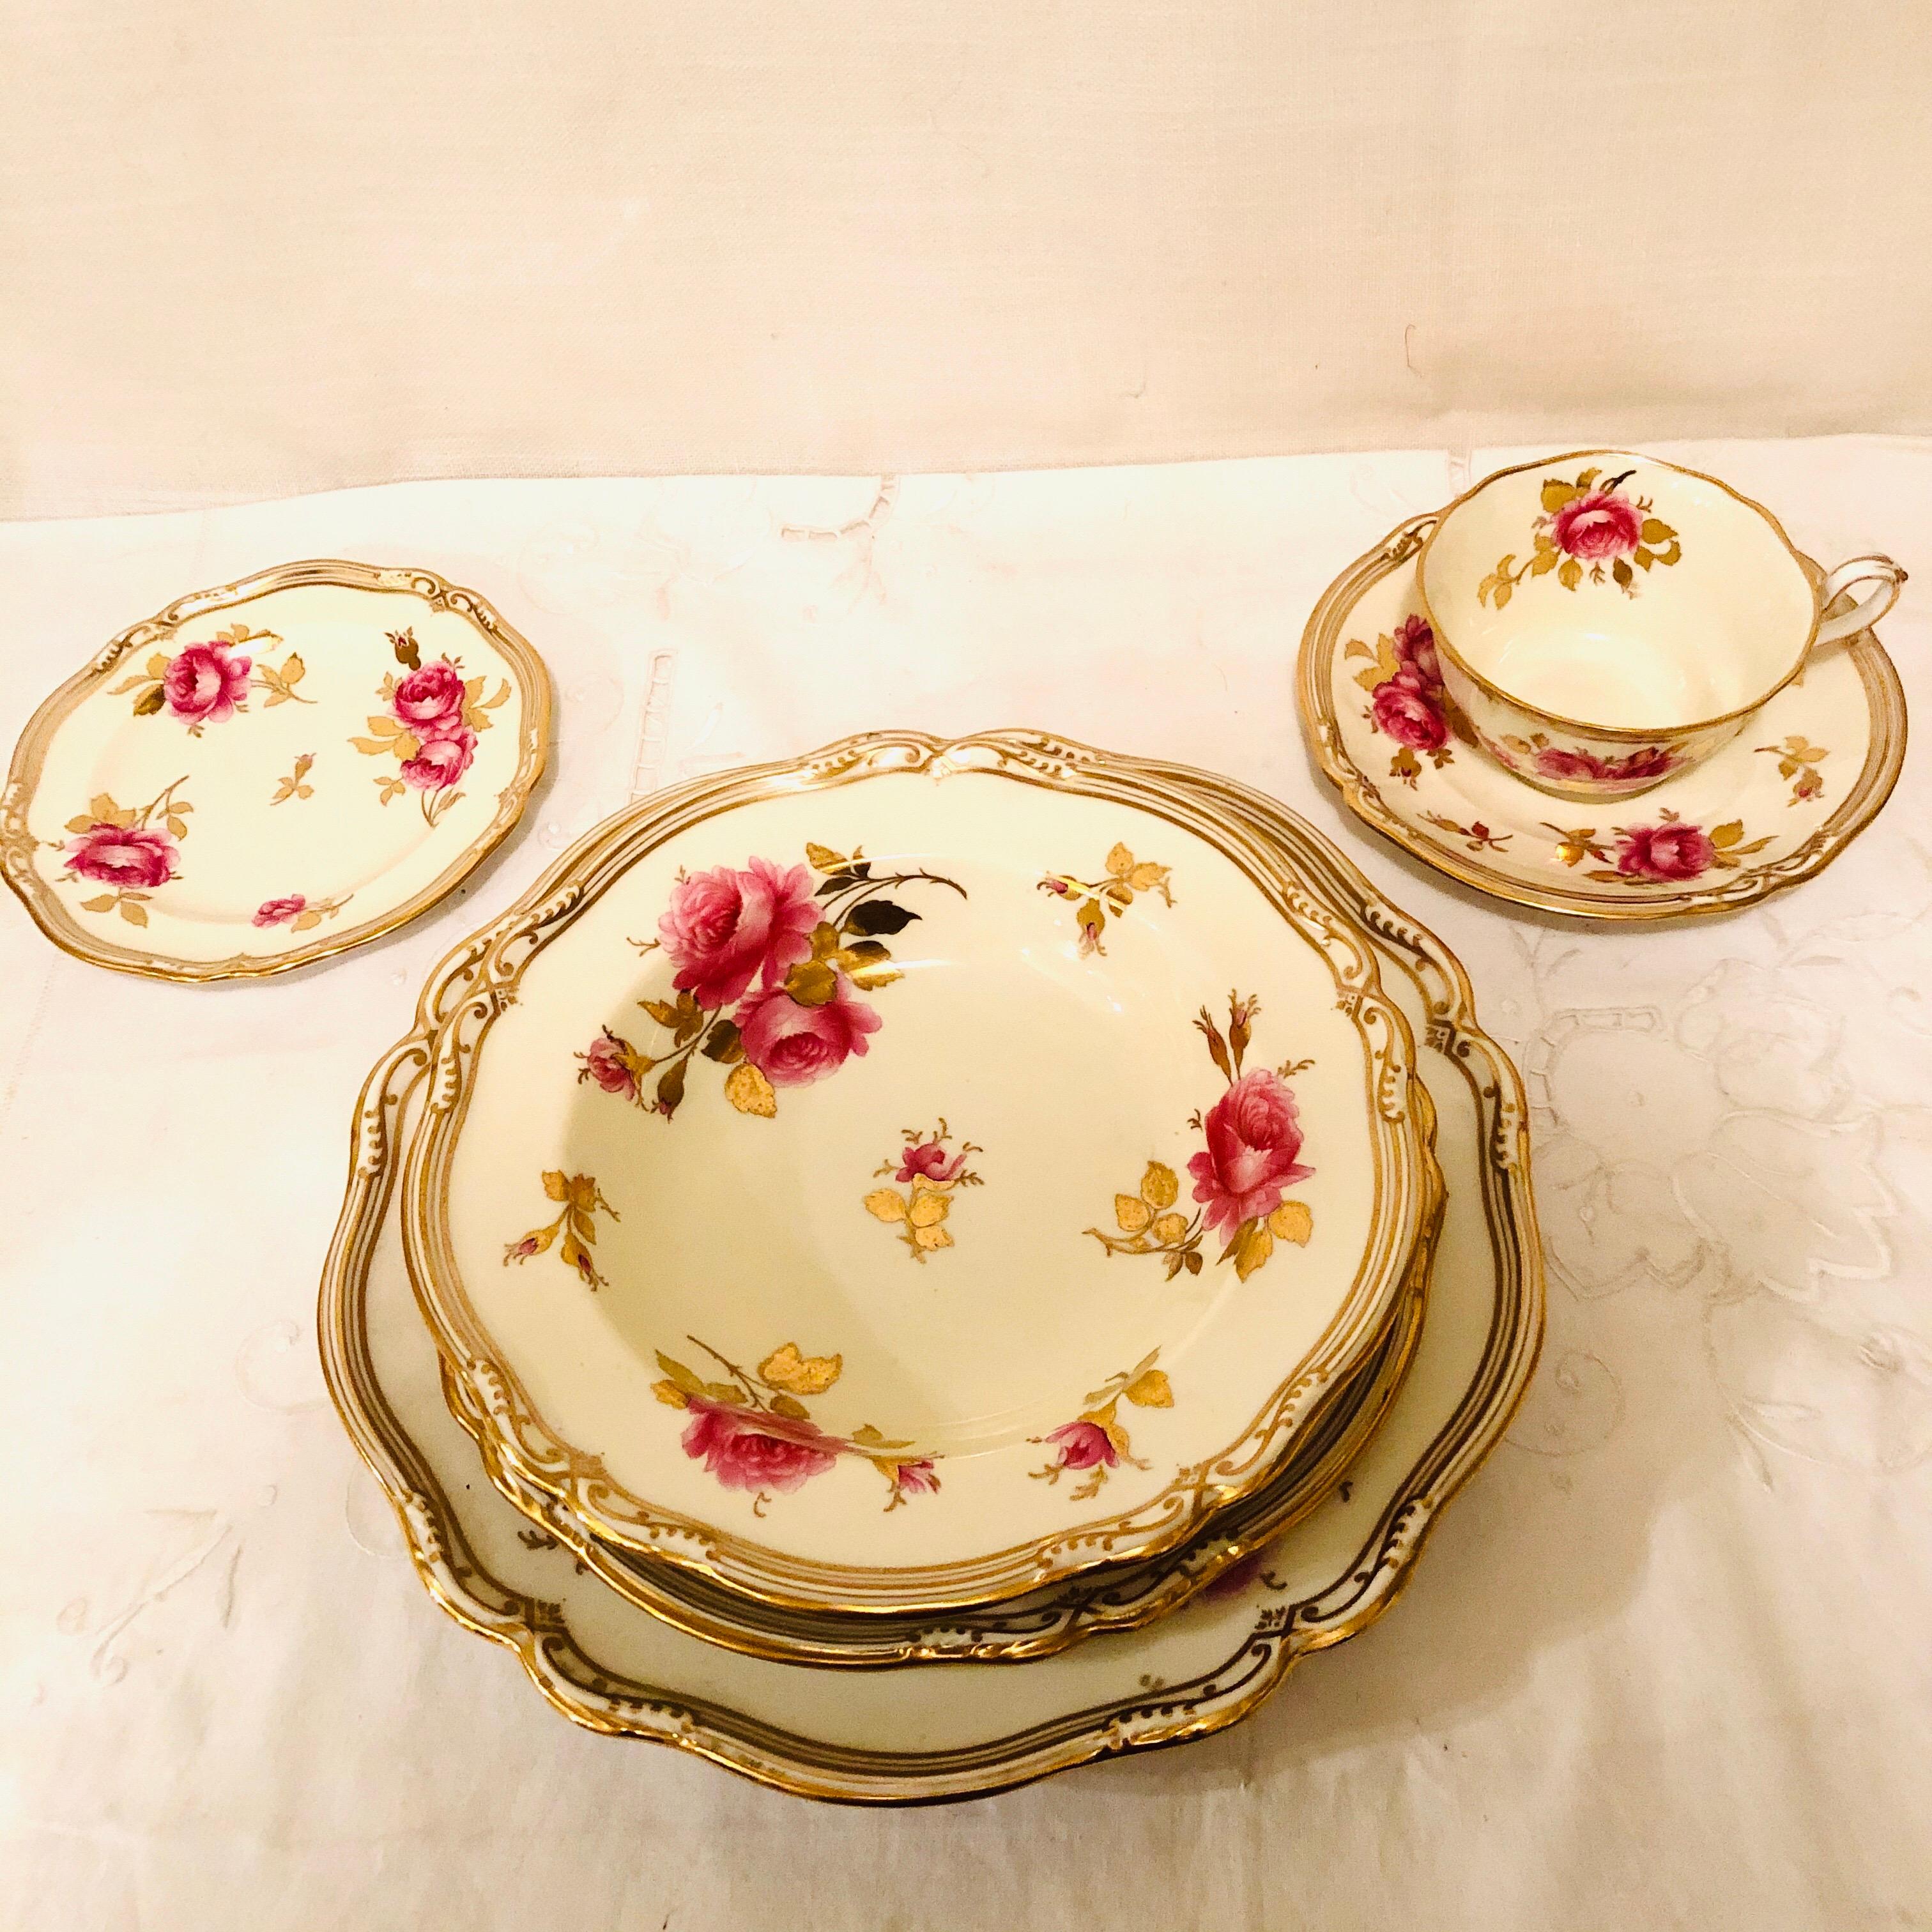 Rococo Spode Made for Tiffany 68 Piece Dinner Service Decorated with Large Pink Roses